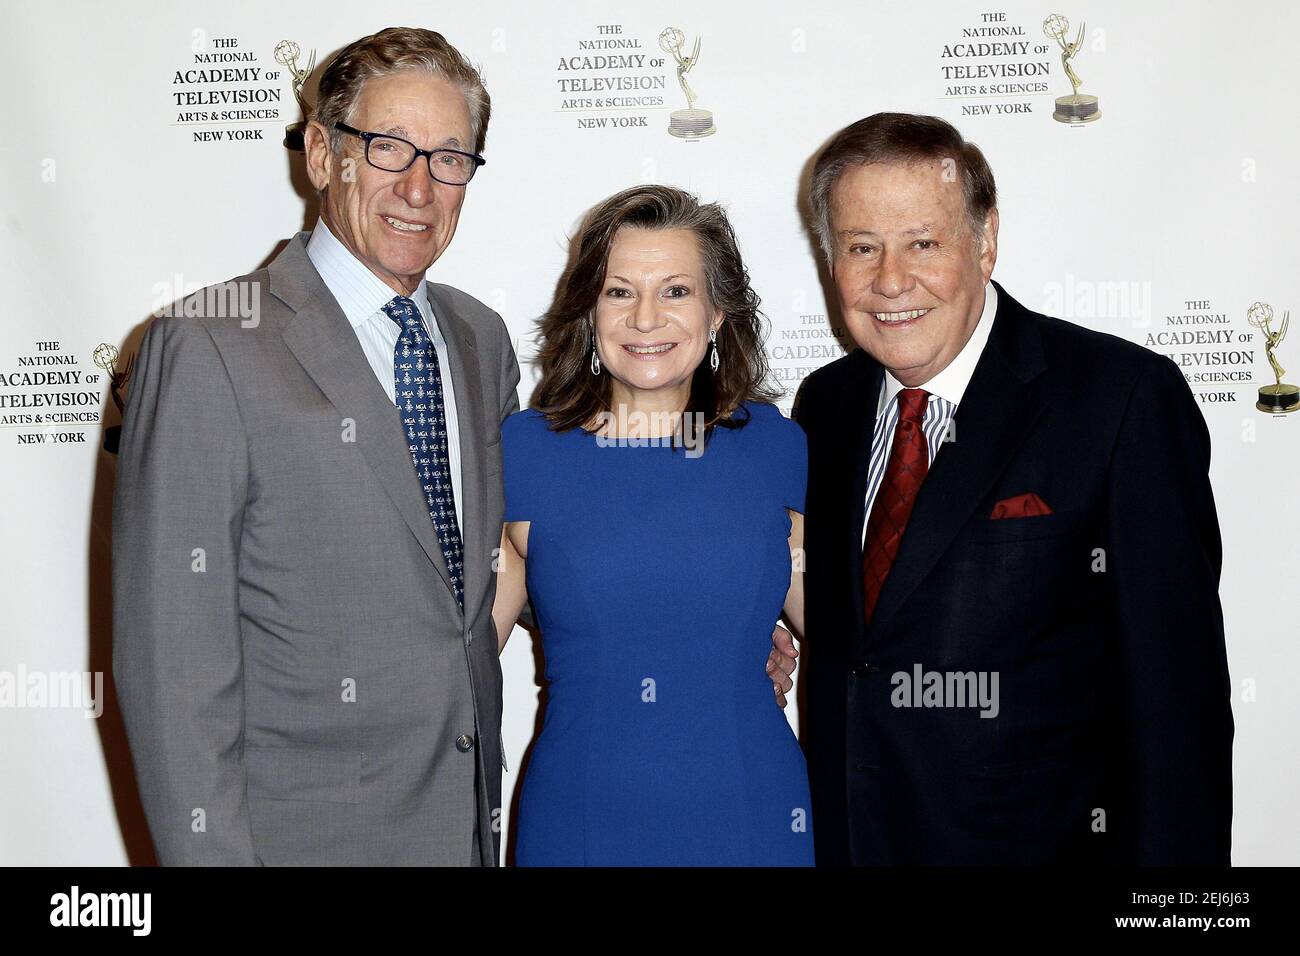 New York, NY, USA. 30 November, 2017. Gold Circle Inductee, Maury Povich, President, National Academy of Television Arts & Sciences, New York Chapter, Denise Rover, Marvin Scott at the 2017 Gold & Silver Circle Induction Ceremony at the Lambs Club. Credit: Steve Mack/Alamy Stock Photo